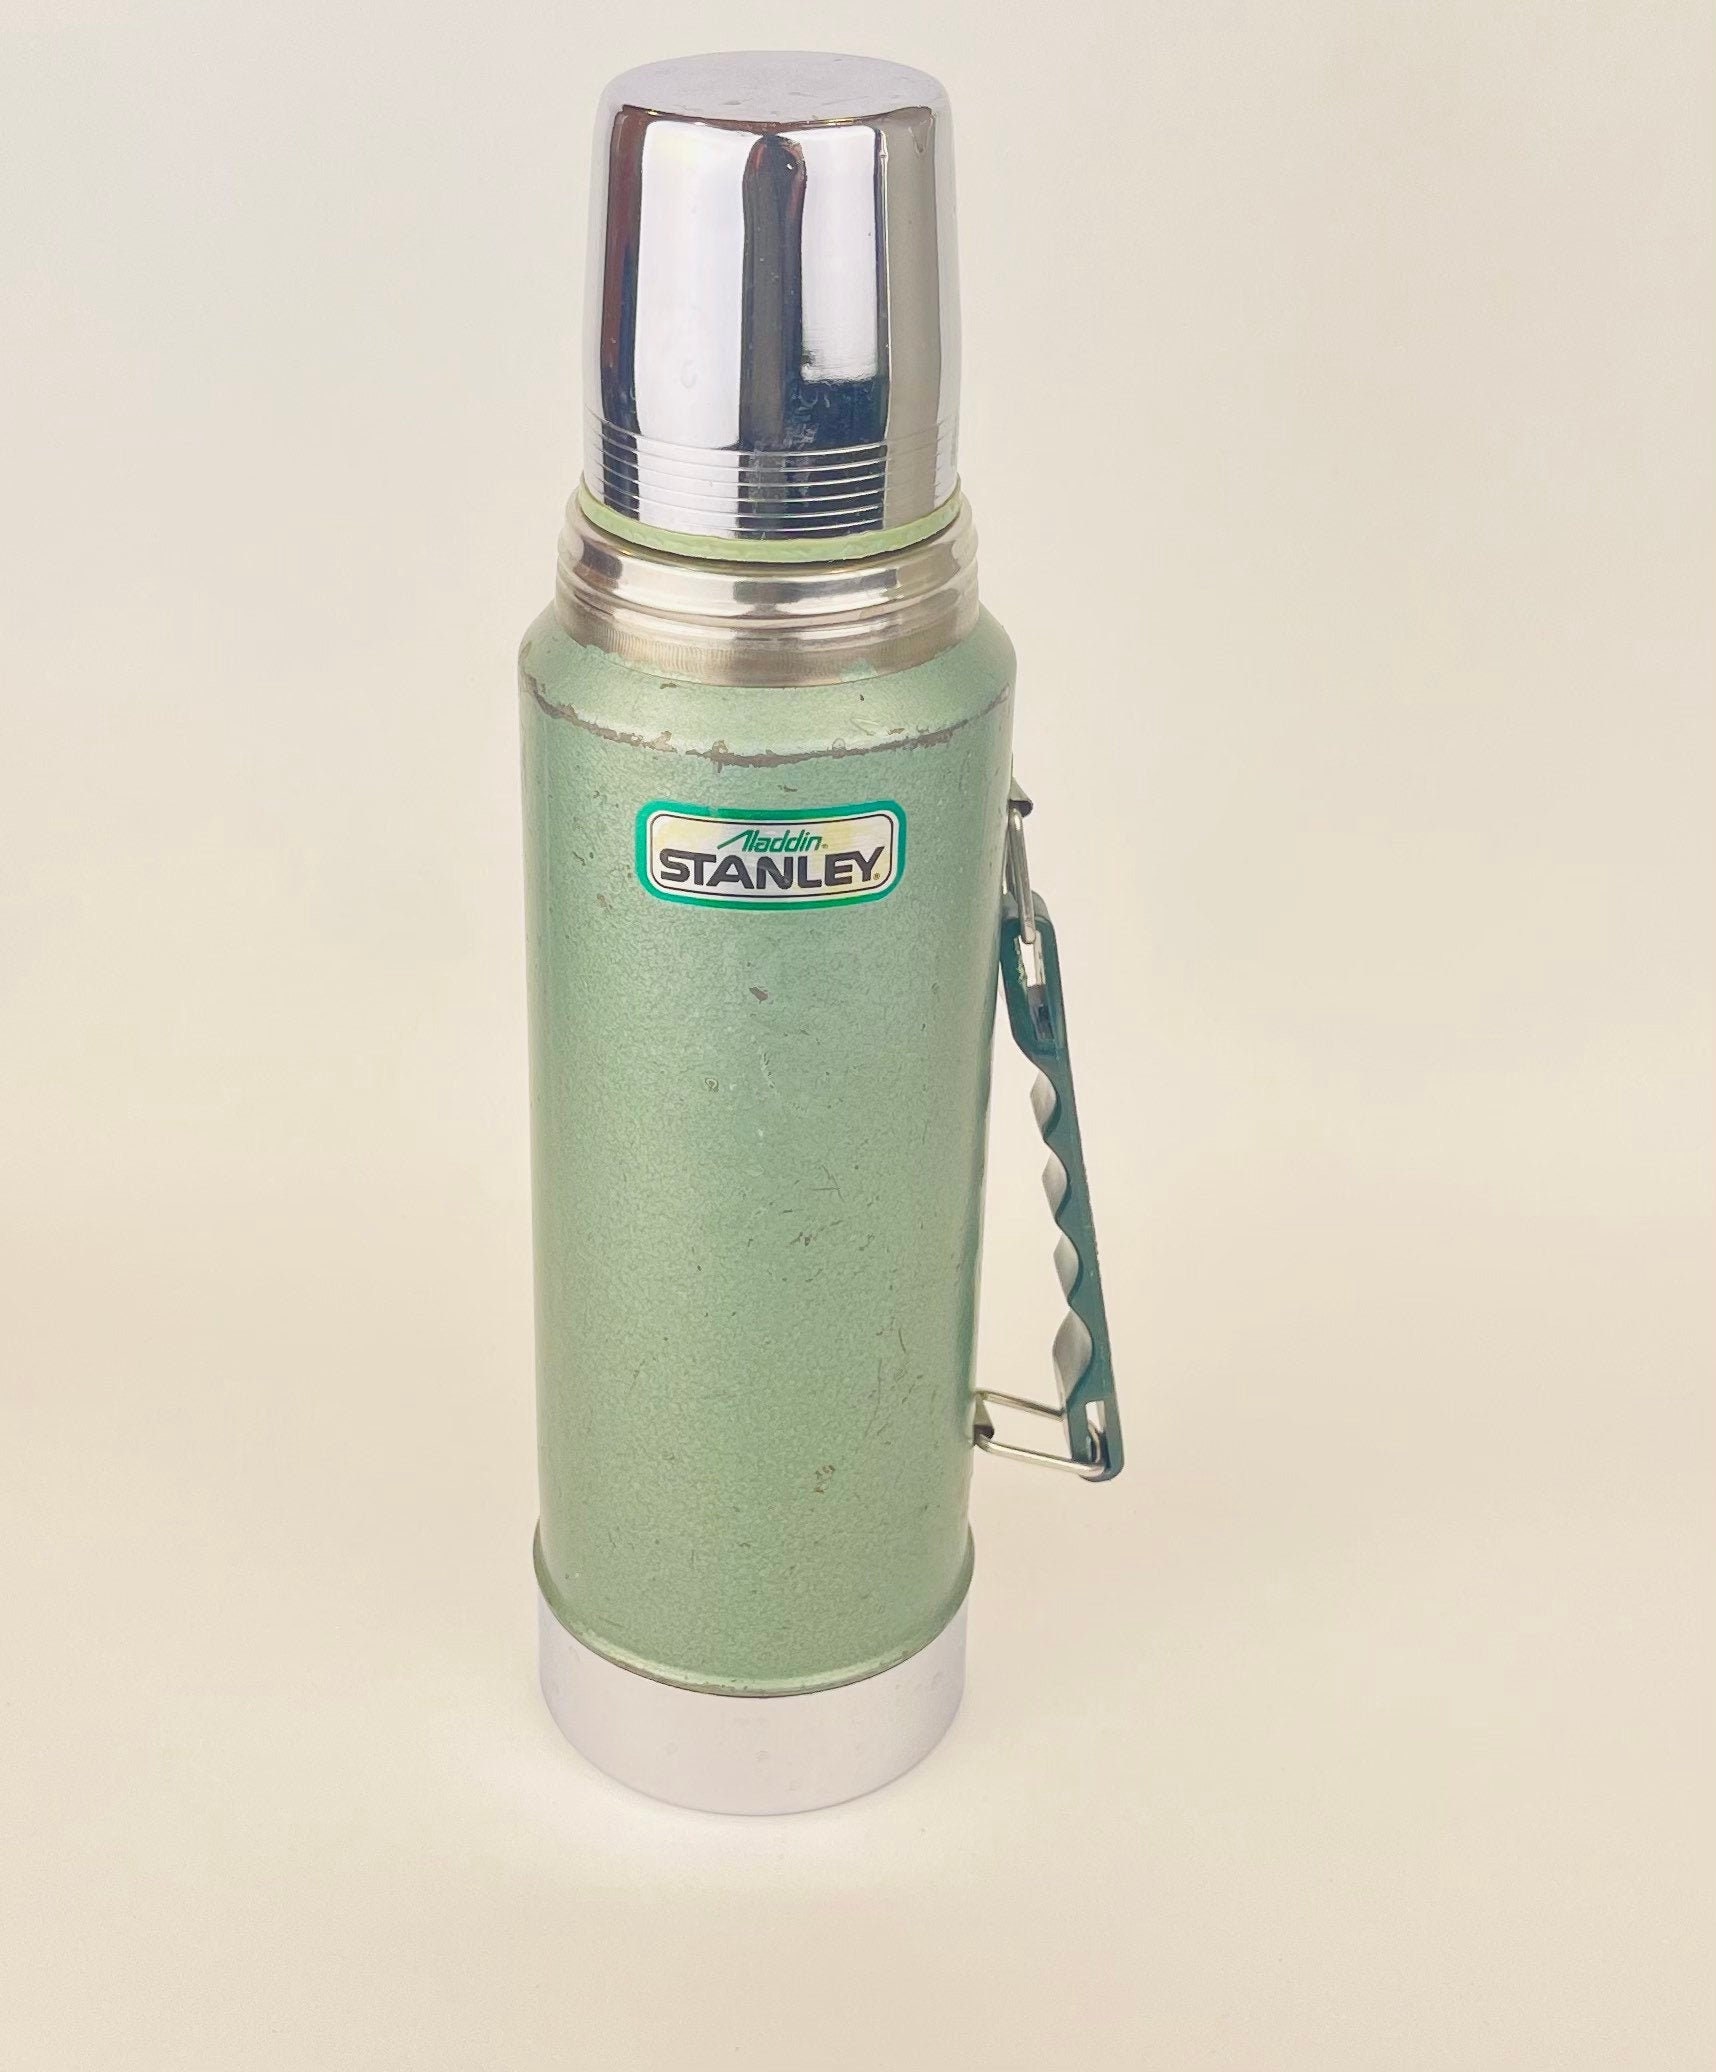 Vintage Aladdin Stanley Thermos 24 Oz Wide Mouth Green Vacuum Bottle A1350B